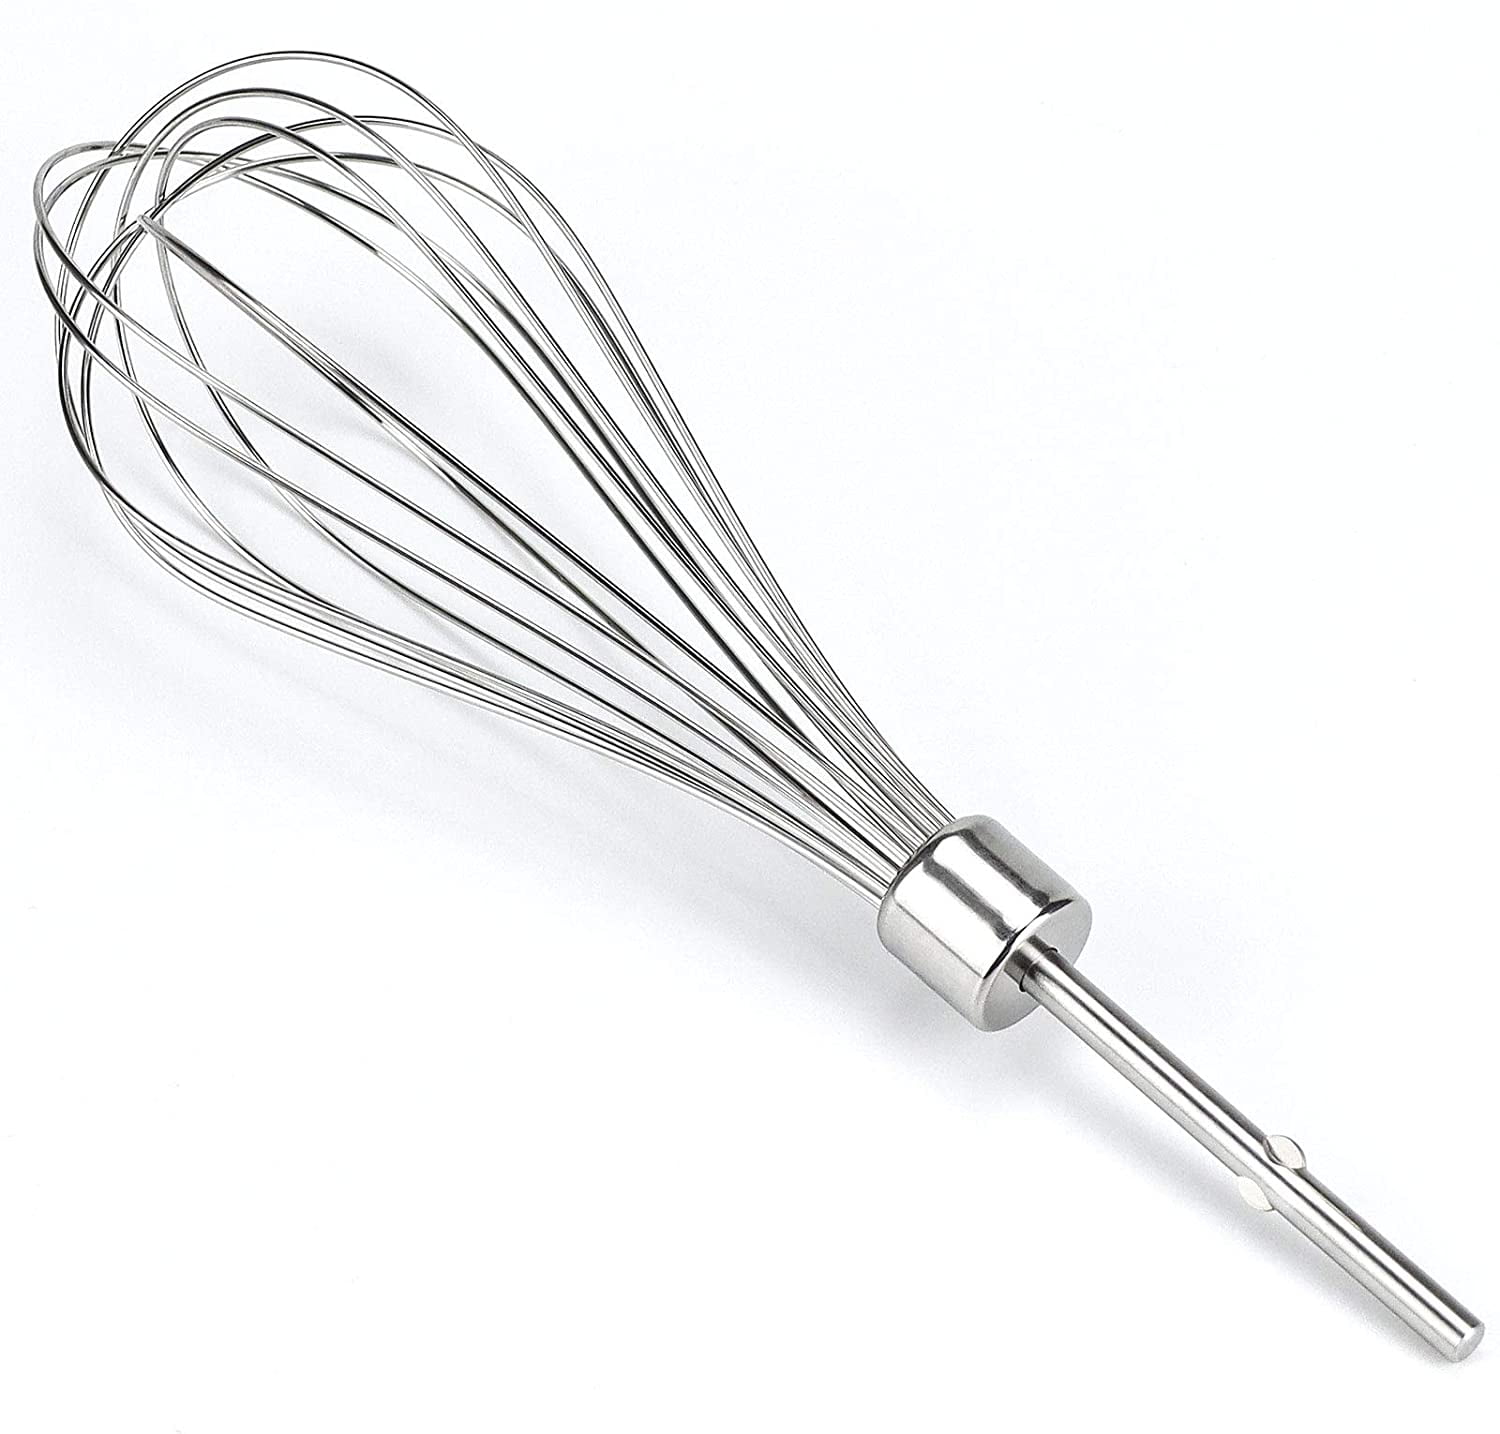 For KitchenAid Mixer Beaters Beaters Mixer 1pcs Eco-Friendly Egg Whisk  Replacement Stainless Steel For KitchenAid